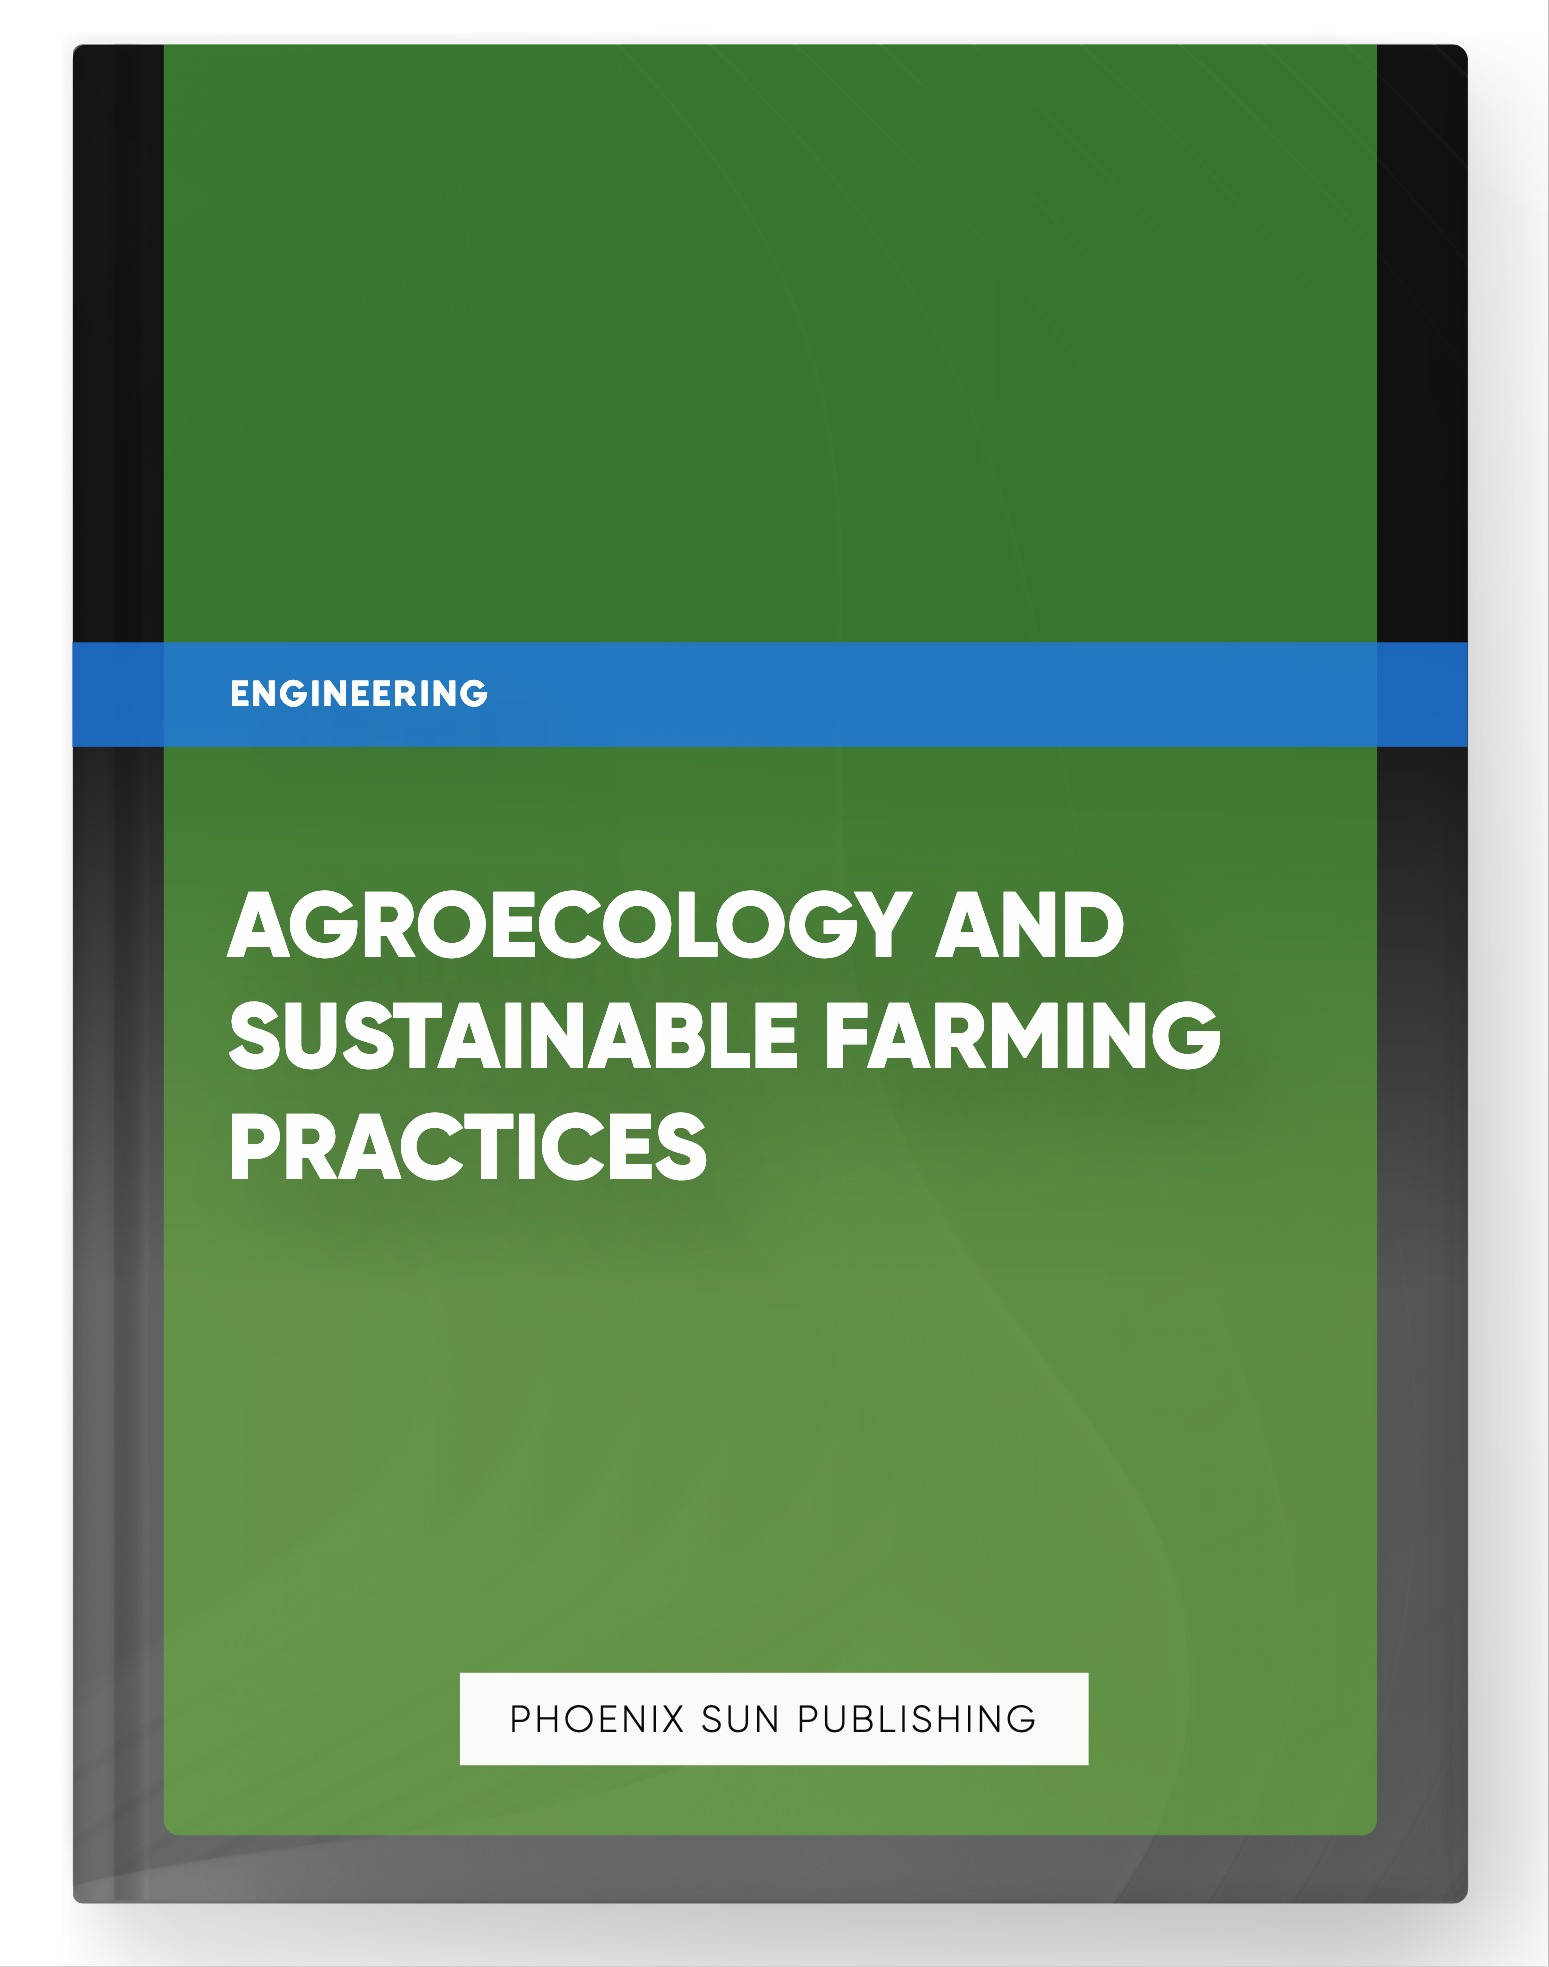 Agroecology and Sustainable Farming Practices